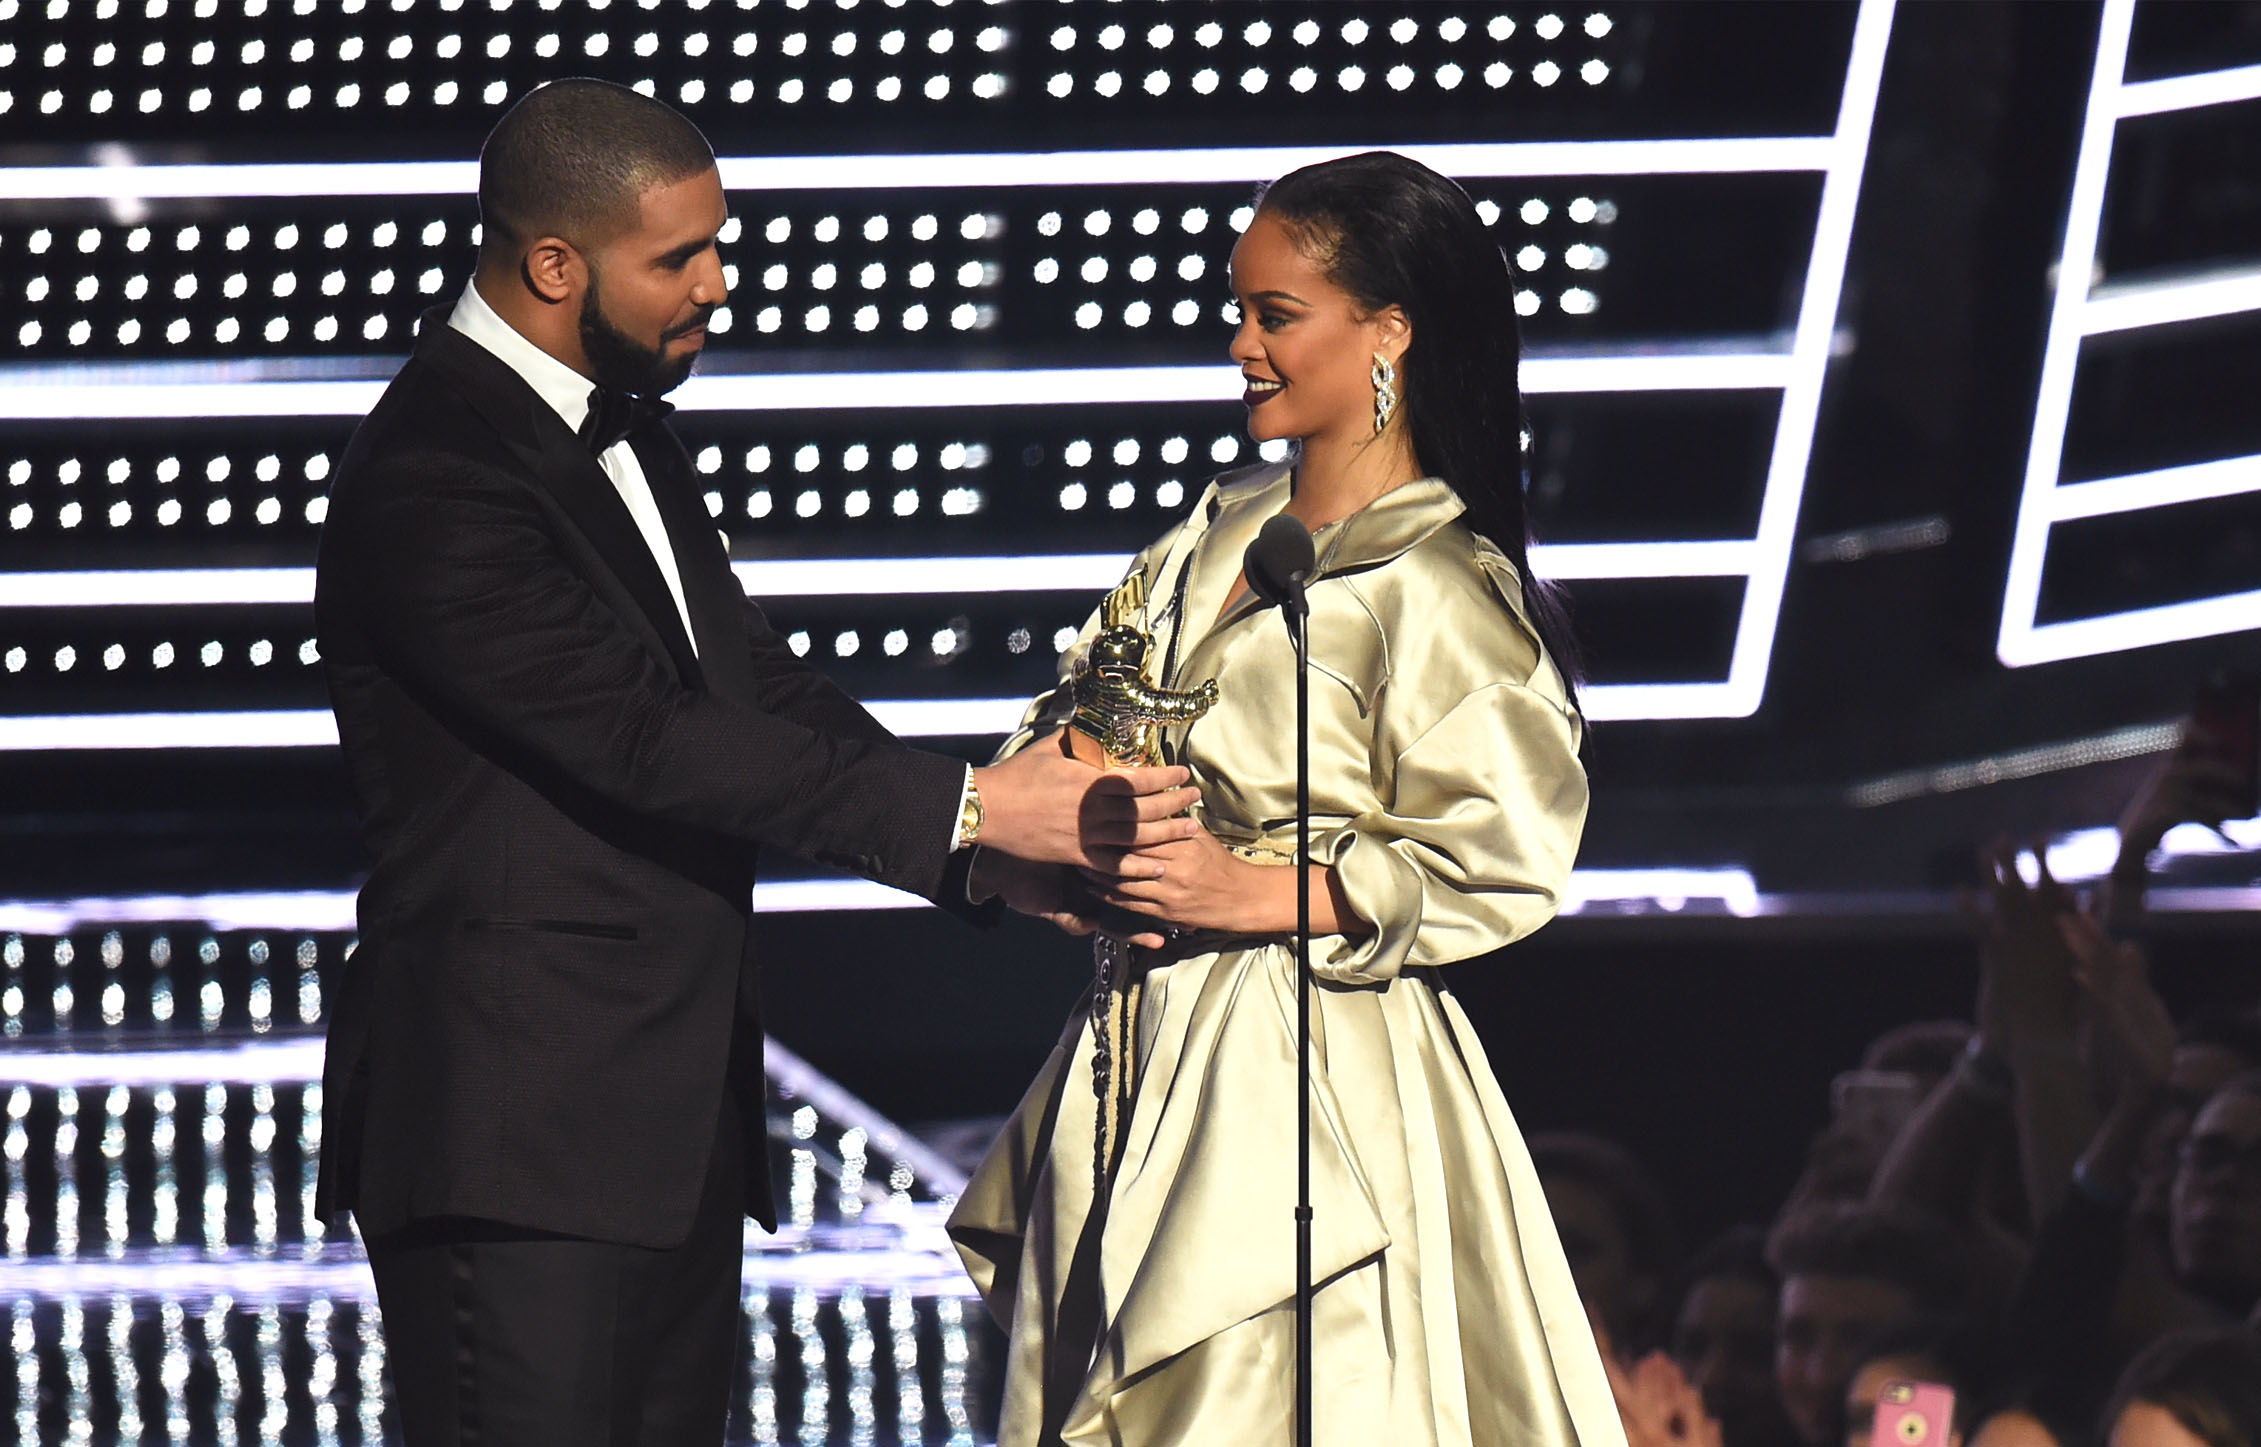 NEW YORK, NY - AUGUST 28: Drake presents Rihanna with the The Video Vanguard Award during the 2016 MTV Video Music Awards at Madison Square Garden on August 28, 2016 in New York City. (Photo by Michael Loccisano/Getty Images)